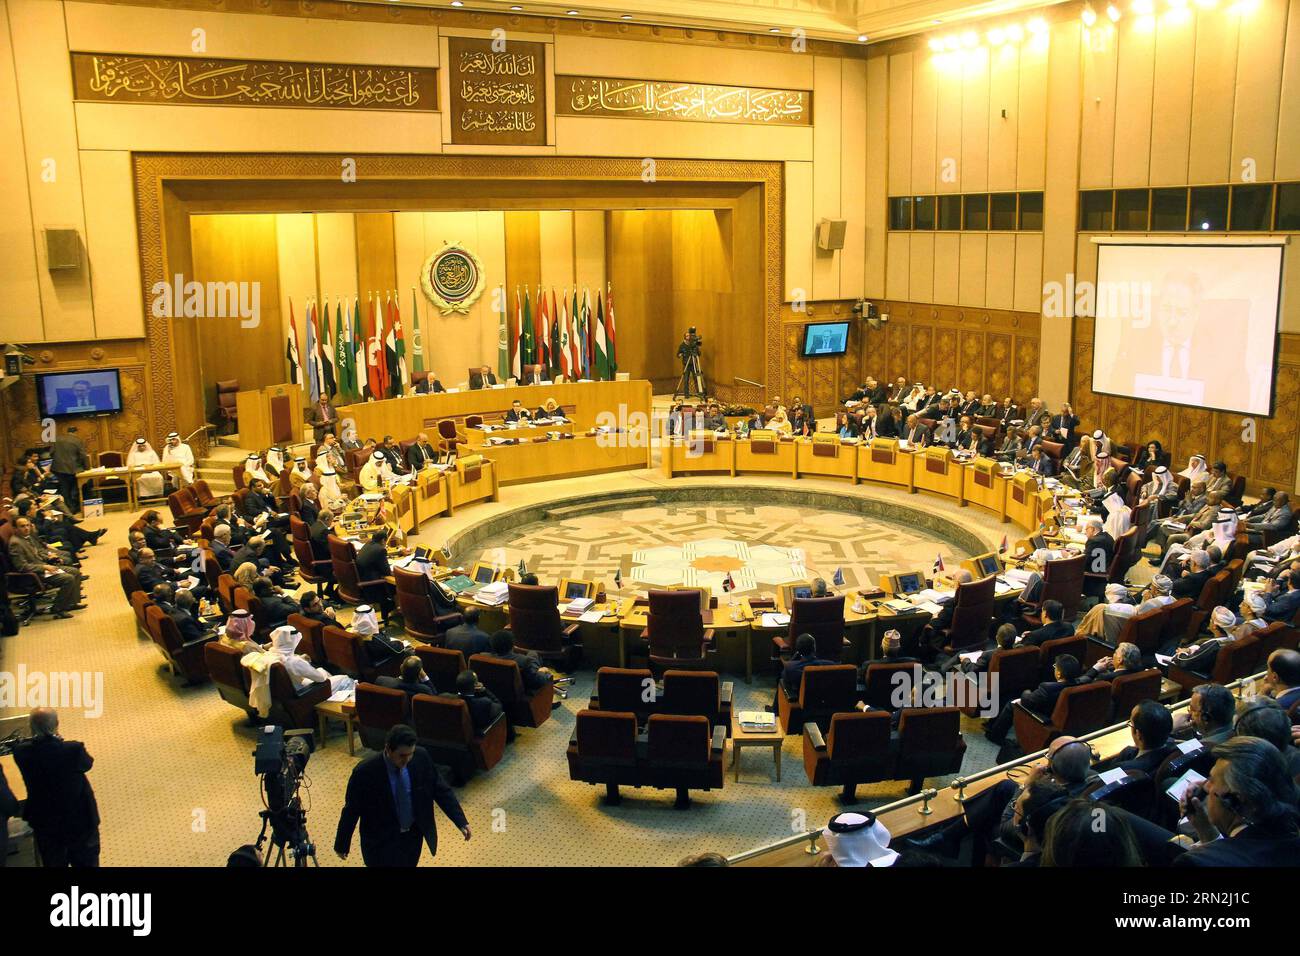 (150309) -- CAIRO, March 9, 2015 -- Representatives attend a meeting of Arab League foreign ministers at the Arab League headquarters in Cairo, Egypt, March 9, 2015. ) (djj) EGYPT-CAIRO-ARAB LEAGUE-FM-MEETING AhmedxGomaa PUBLICATIONxNOTxINxCHN   Cairo March 9 2015 Representatives attend a Meeting of Arab League Foreign Minister AT The Arab League Headquarters in Cairo Egypt March 9 2015  Egypt Cairo Arab League FM Meeting  PUBLICATIONxNOTxINxCHN Stock Photo